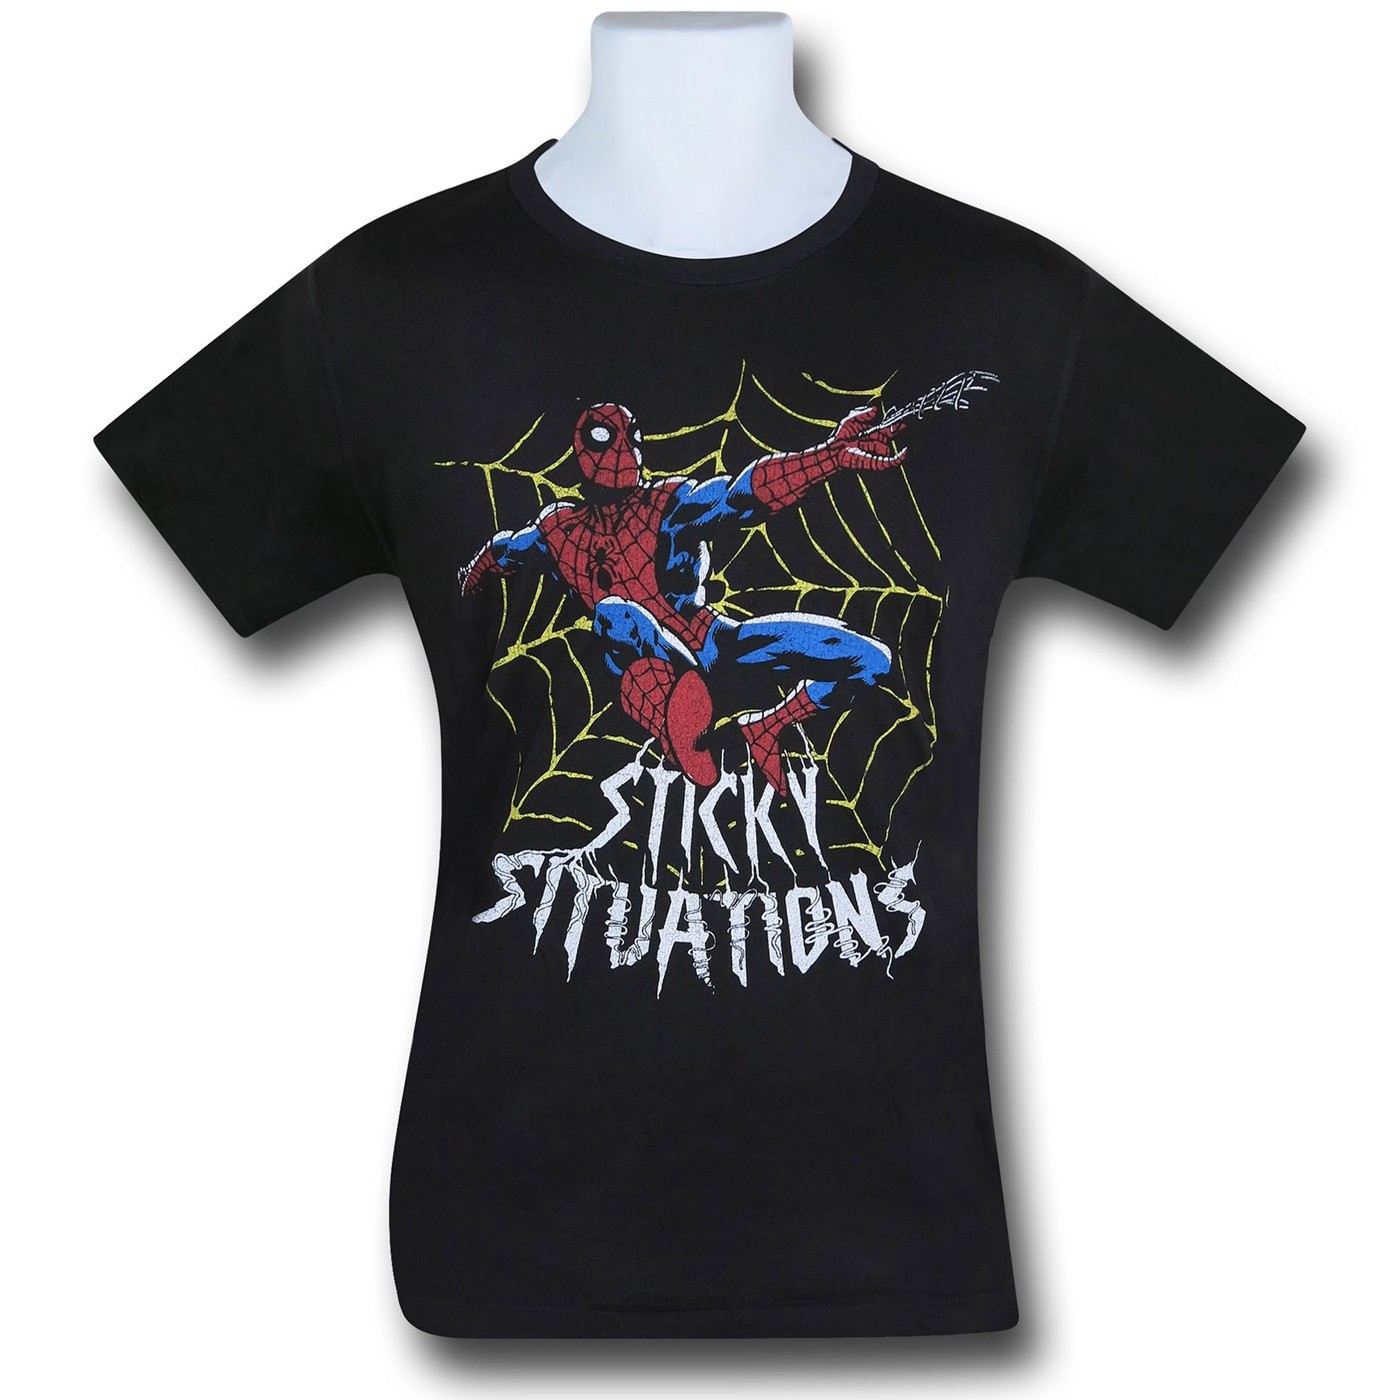 Spiderman sticky situation